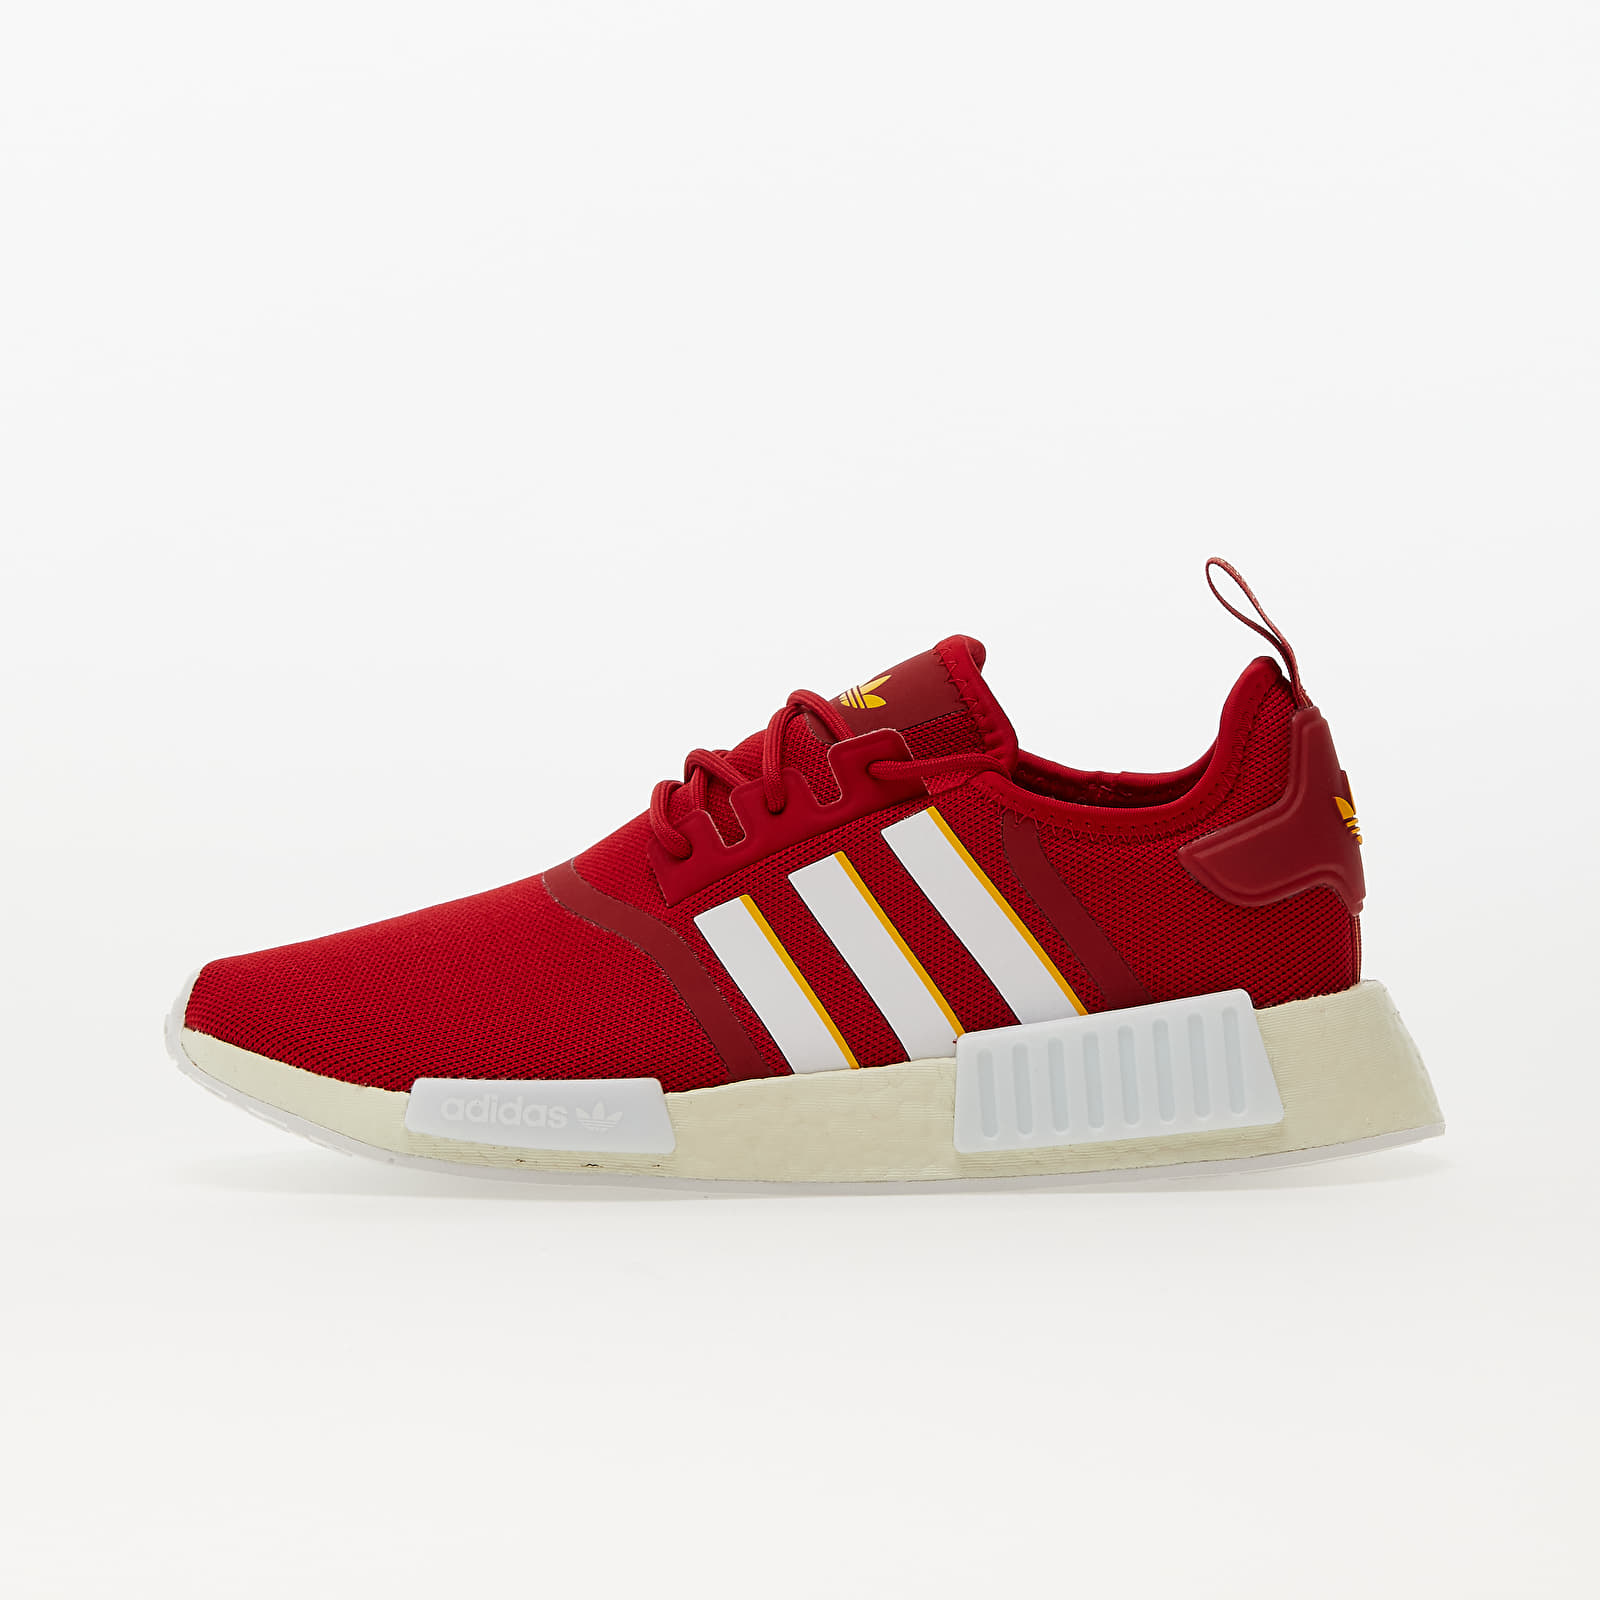 Men's shoes adidas NMD_R1 Team Power Red/ Ftw White/ Off White